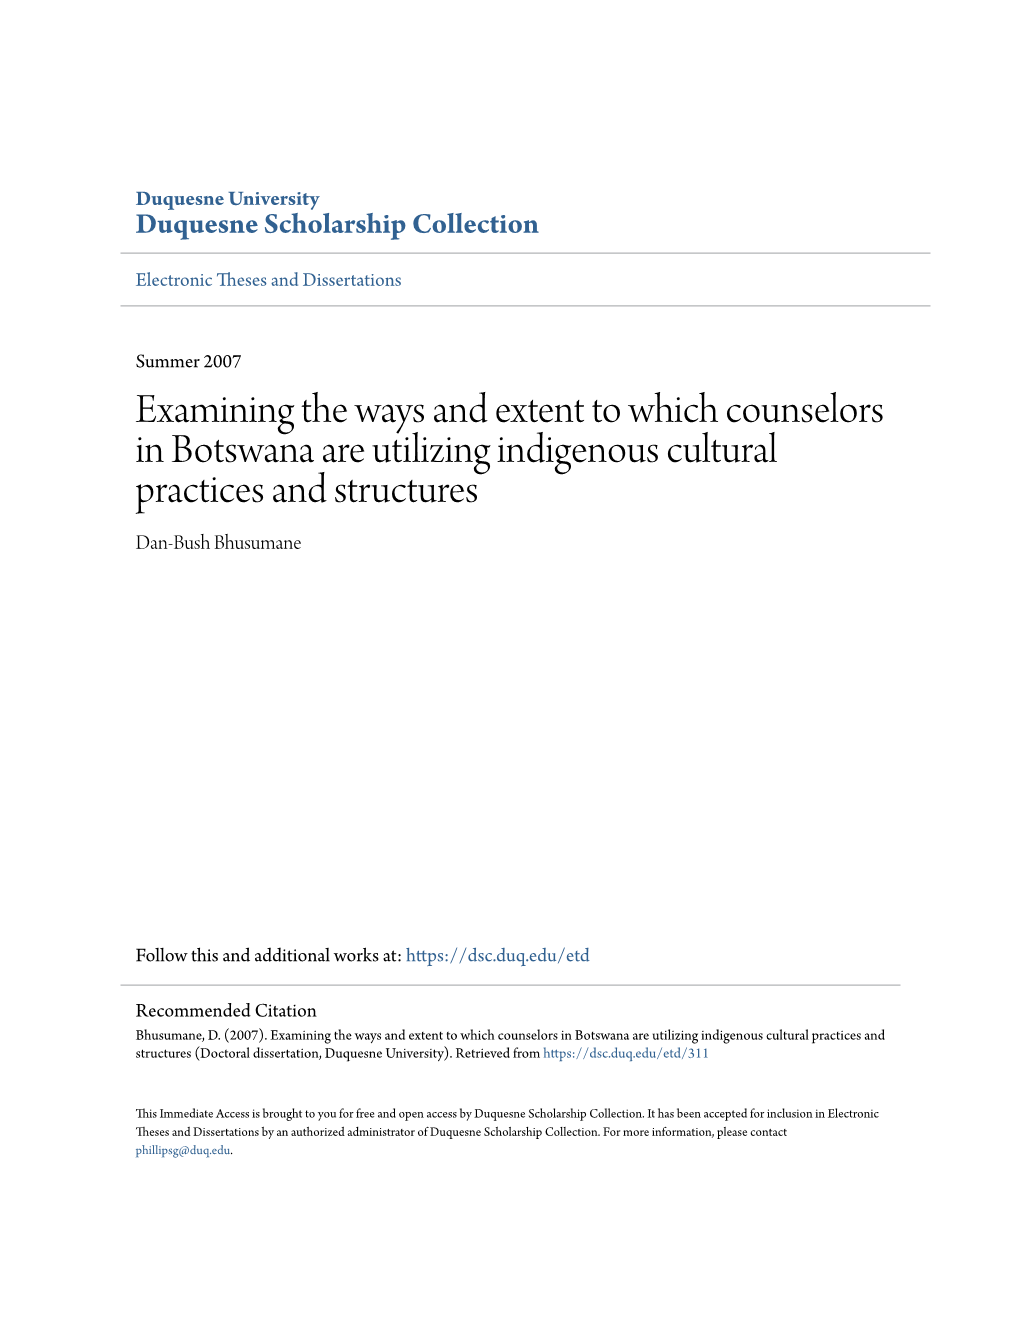 Examining the Ways and Extent to Which Counselors in Botswana Are Utilizing Indigenous Cultural Practices and Structures Dan-Bush Bhusumane